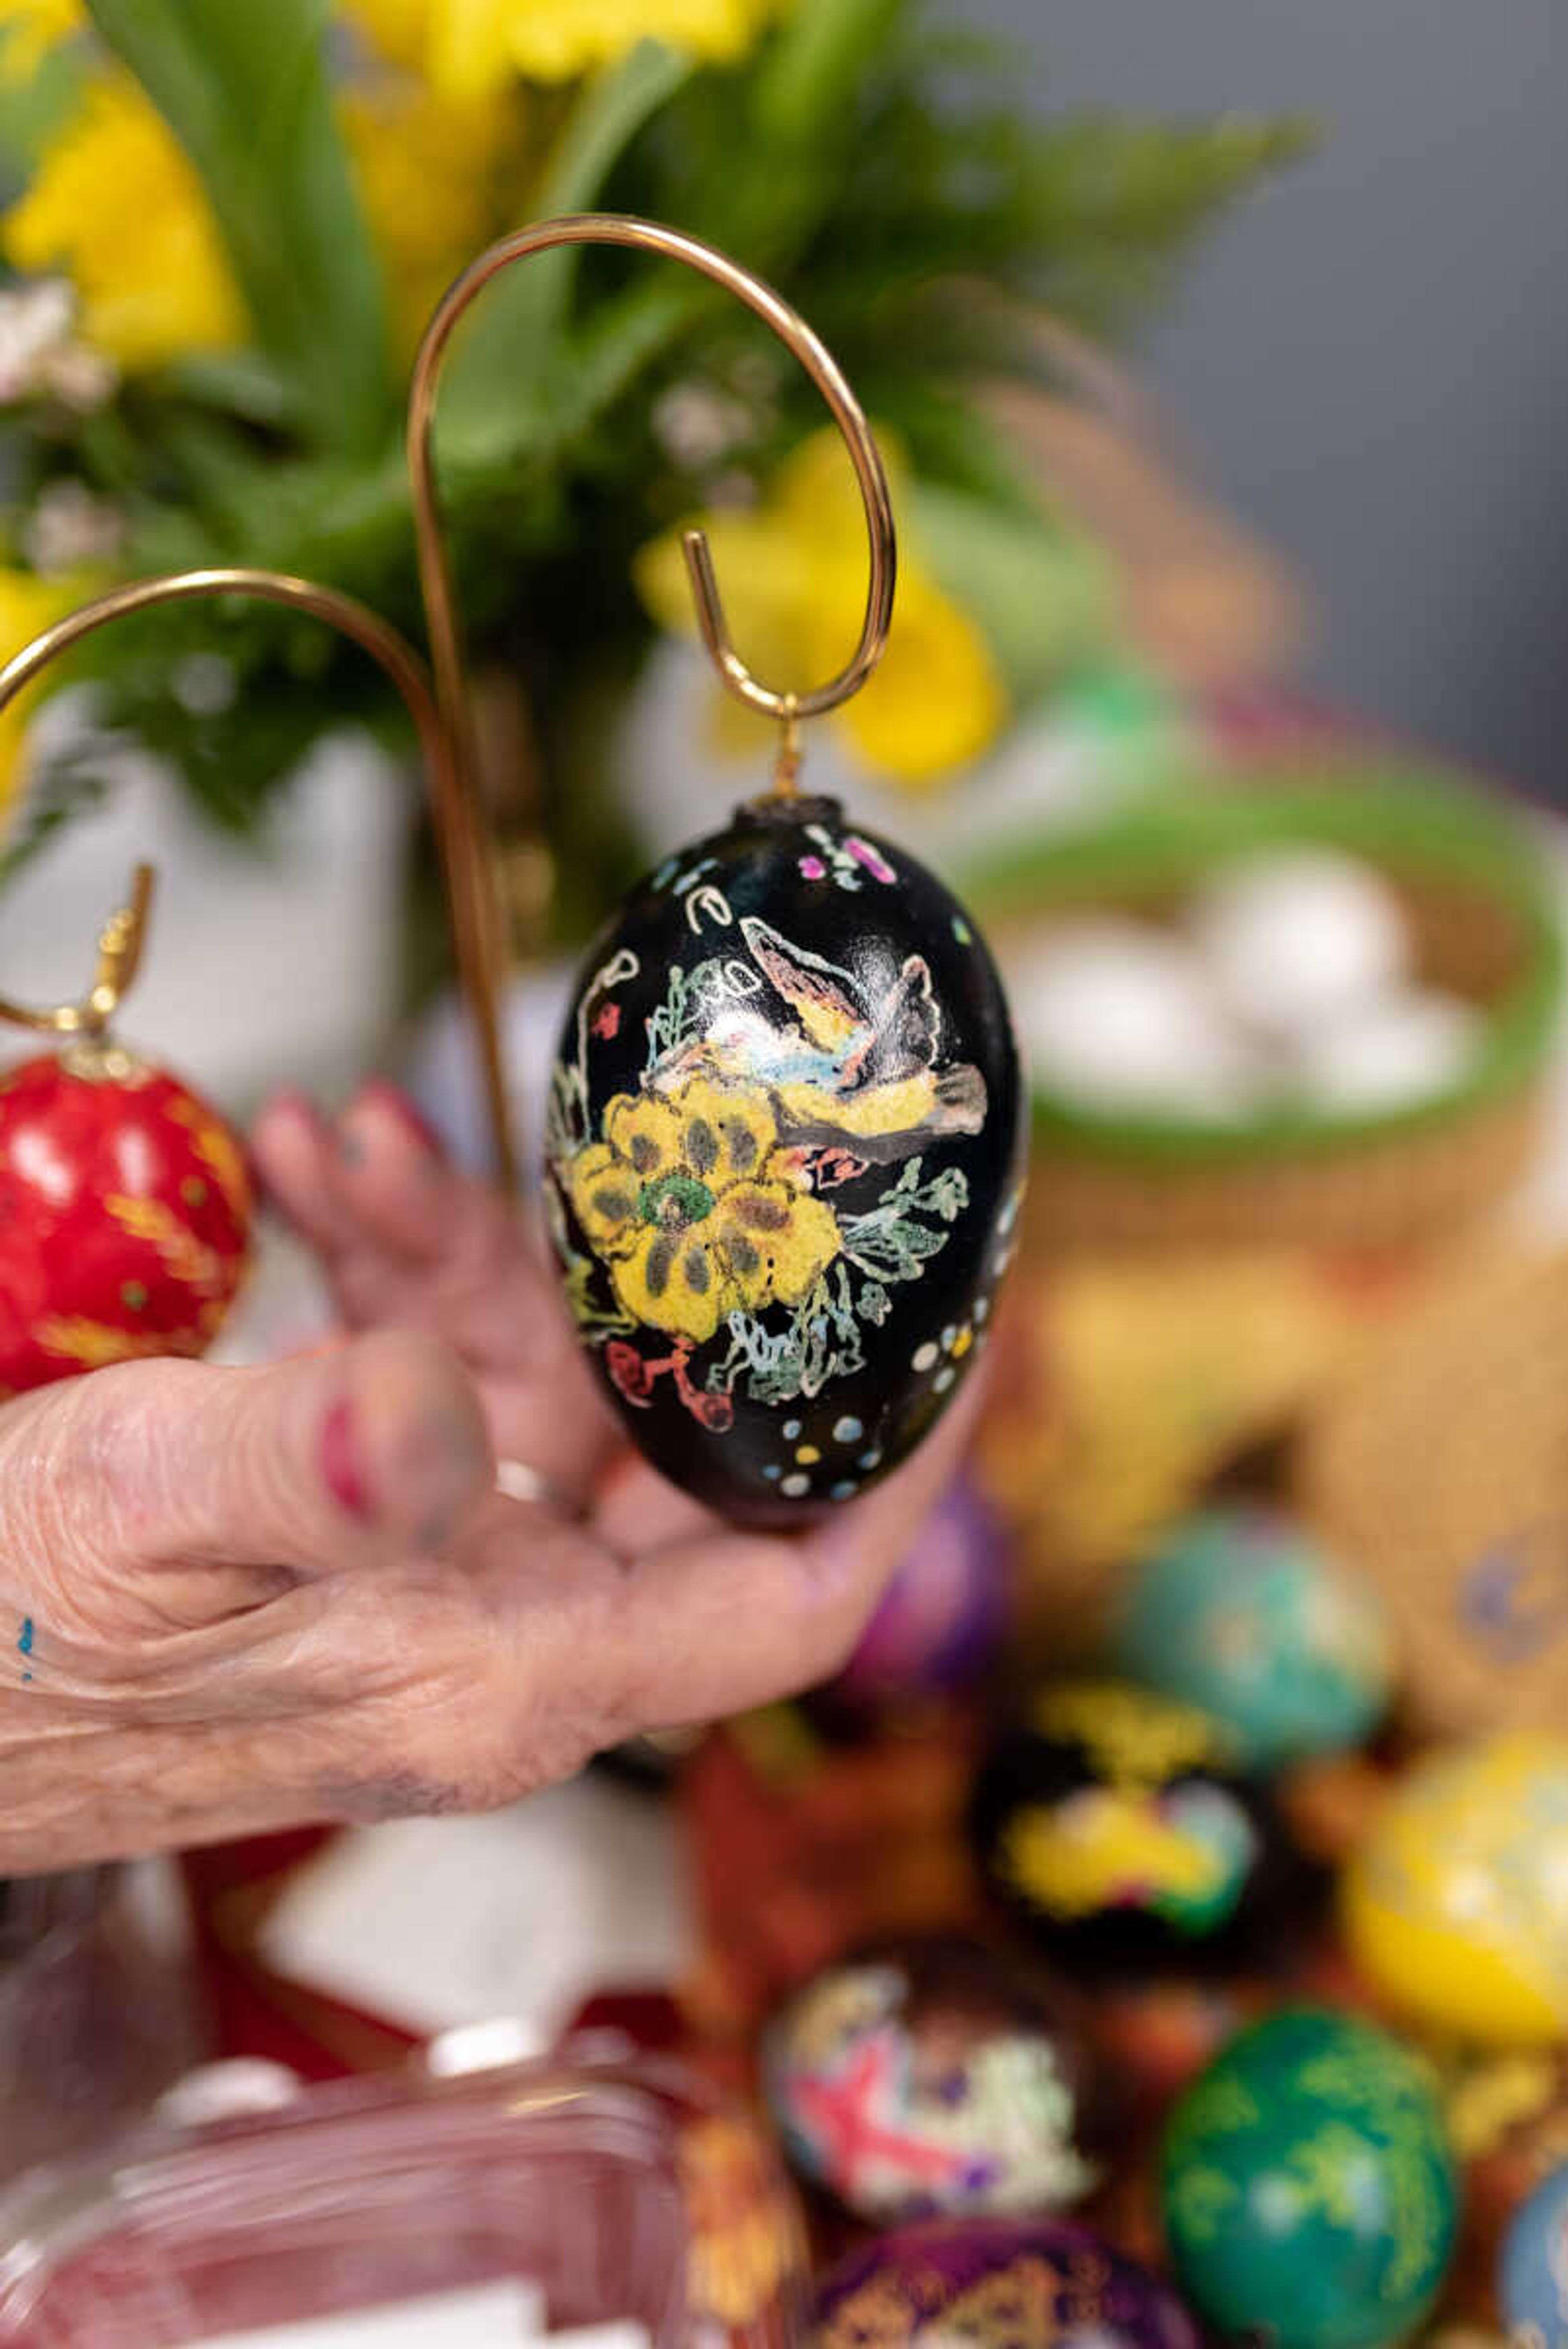 Pysanky: Use an ancient tradition to spruce up your Easter eggs this year